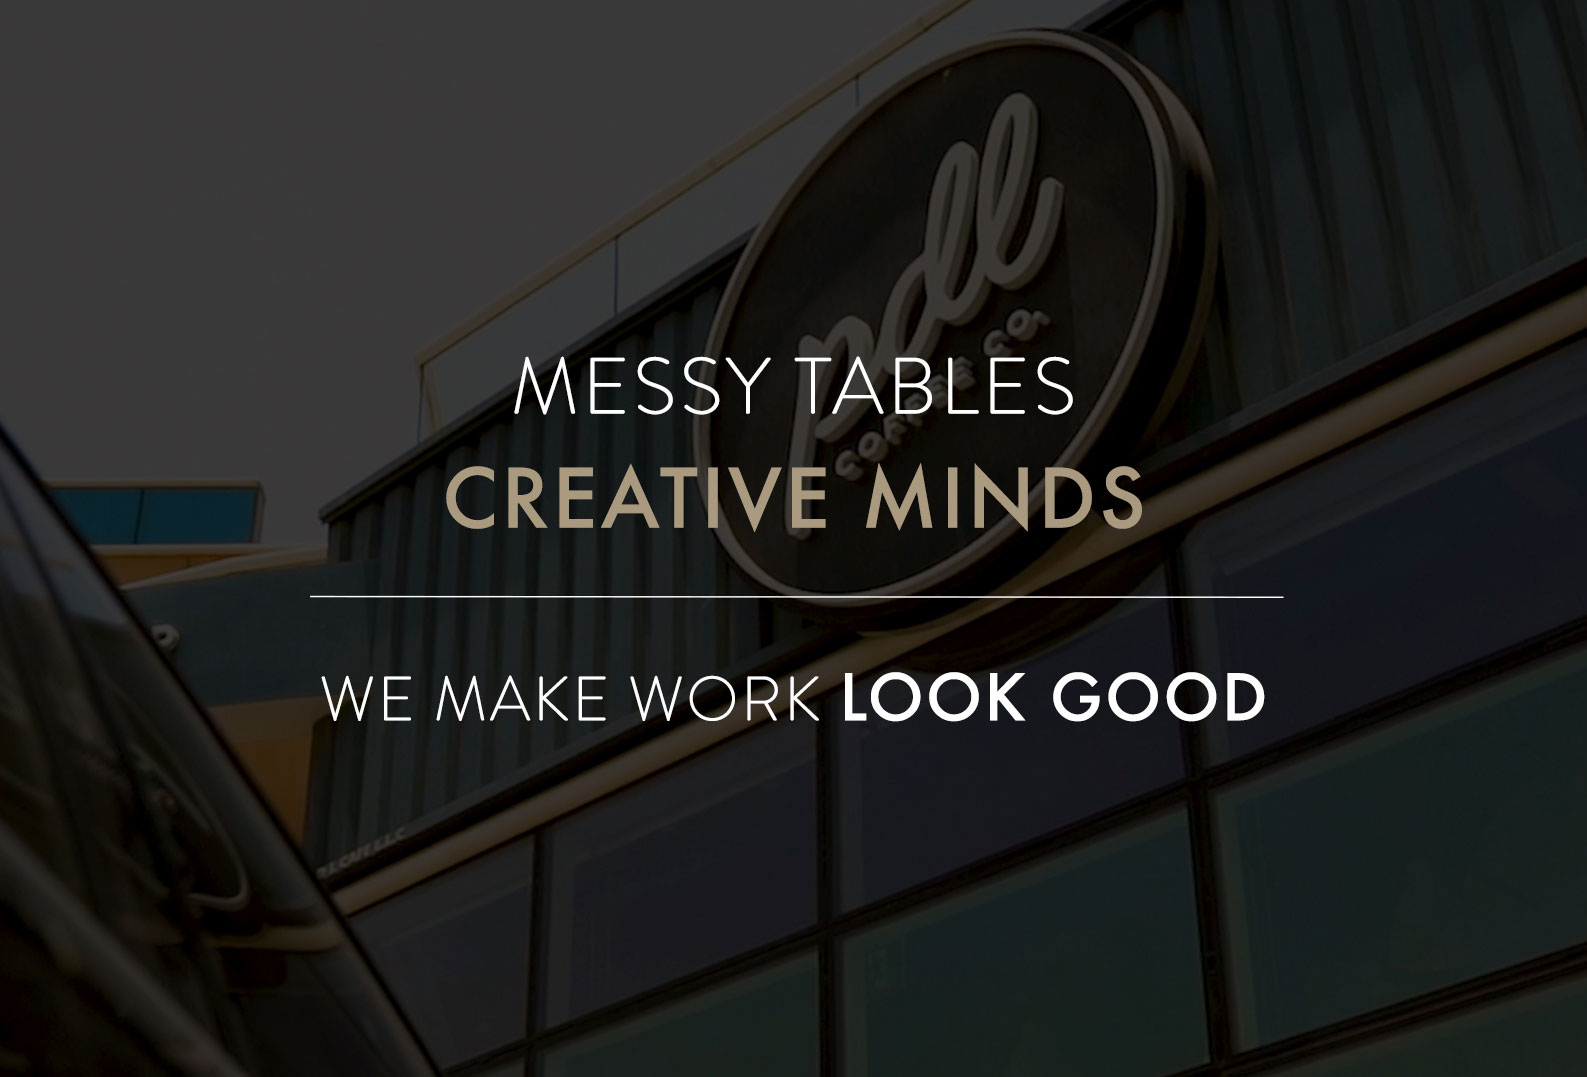 Messy Tables Creative Minds